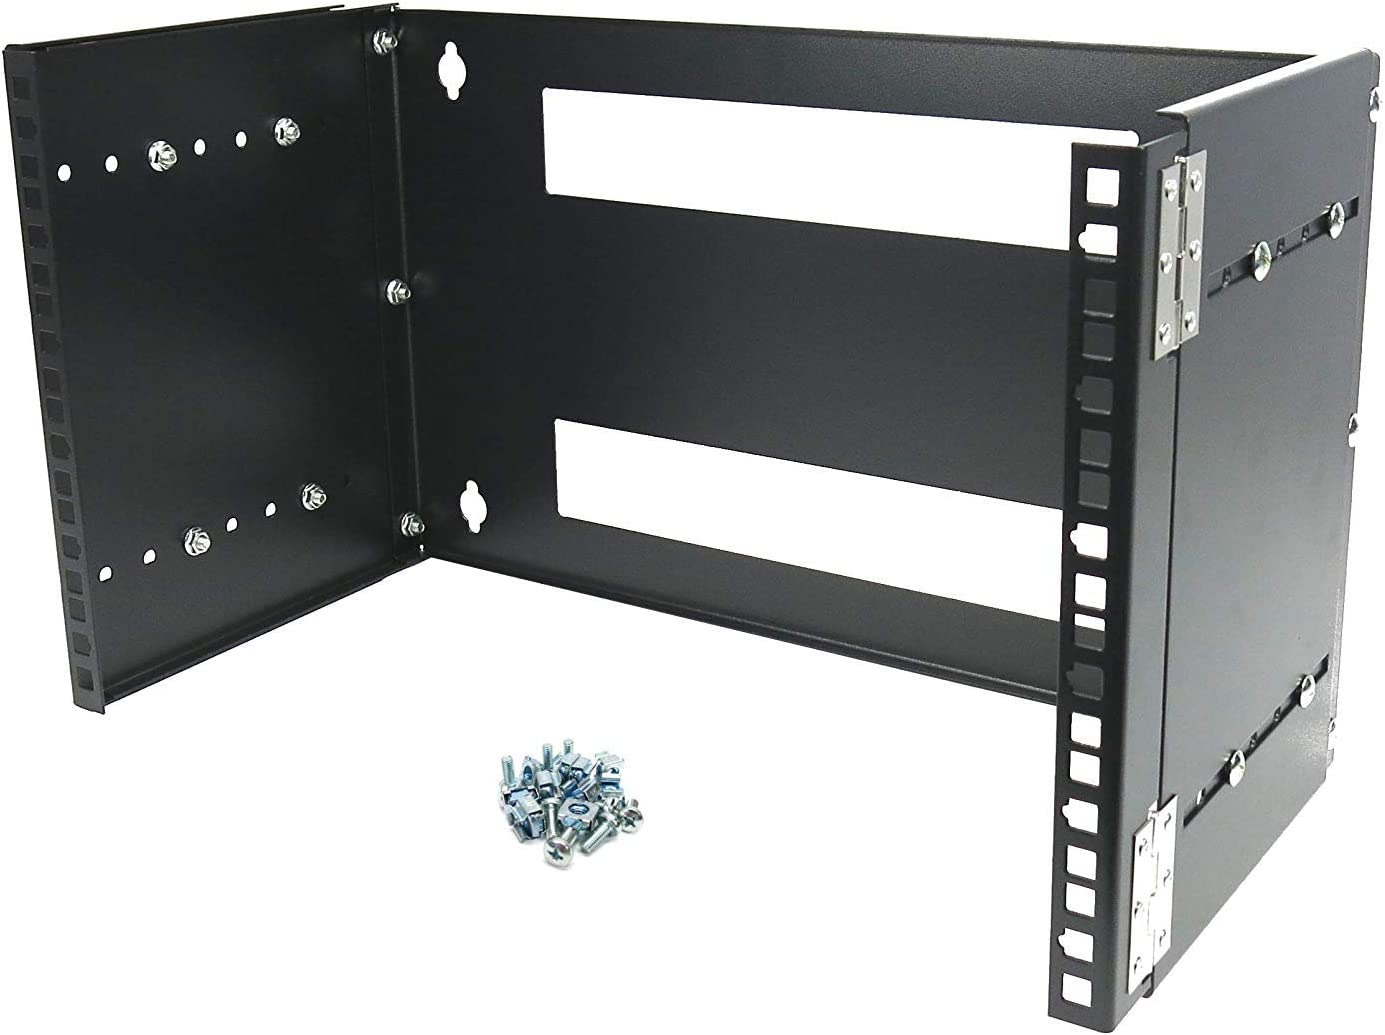 6U 19-Inch Hinged Extendable Wall Mount Bracket Collapsible Network Equipment Ra